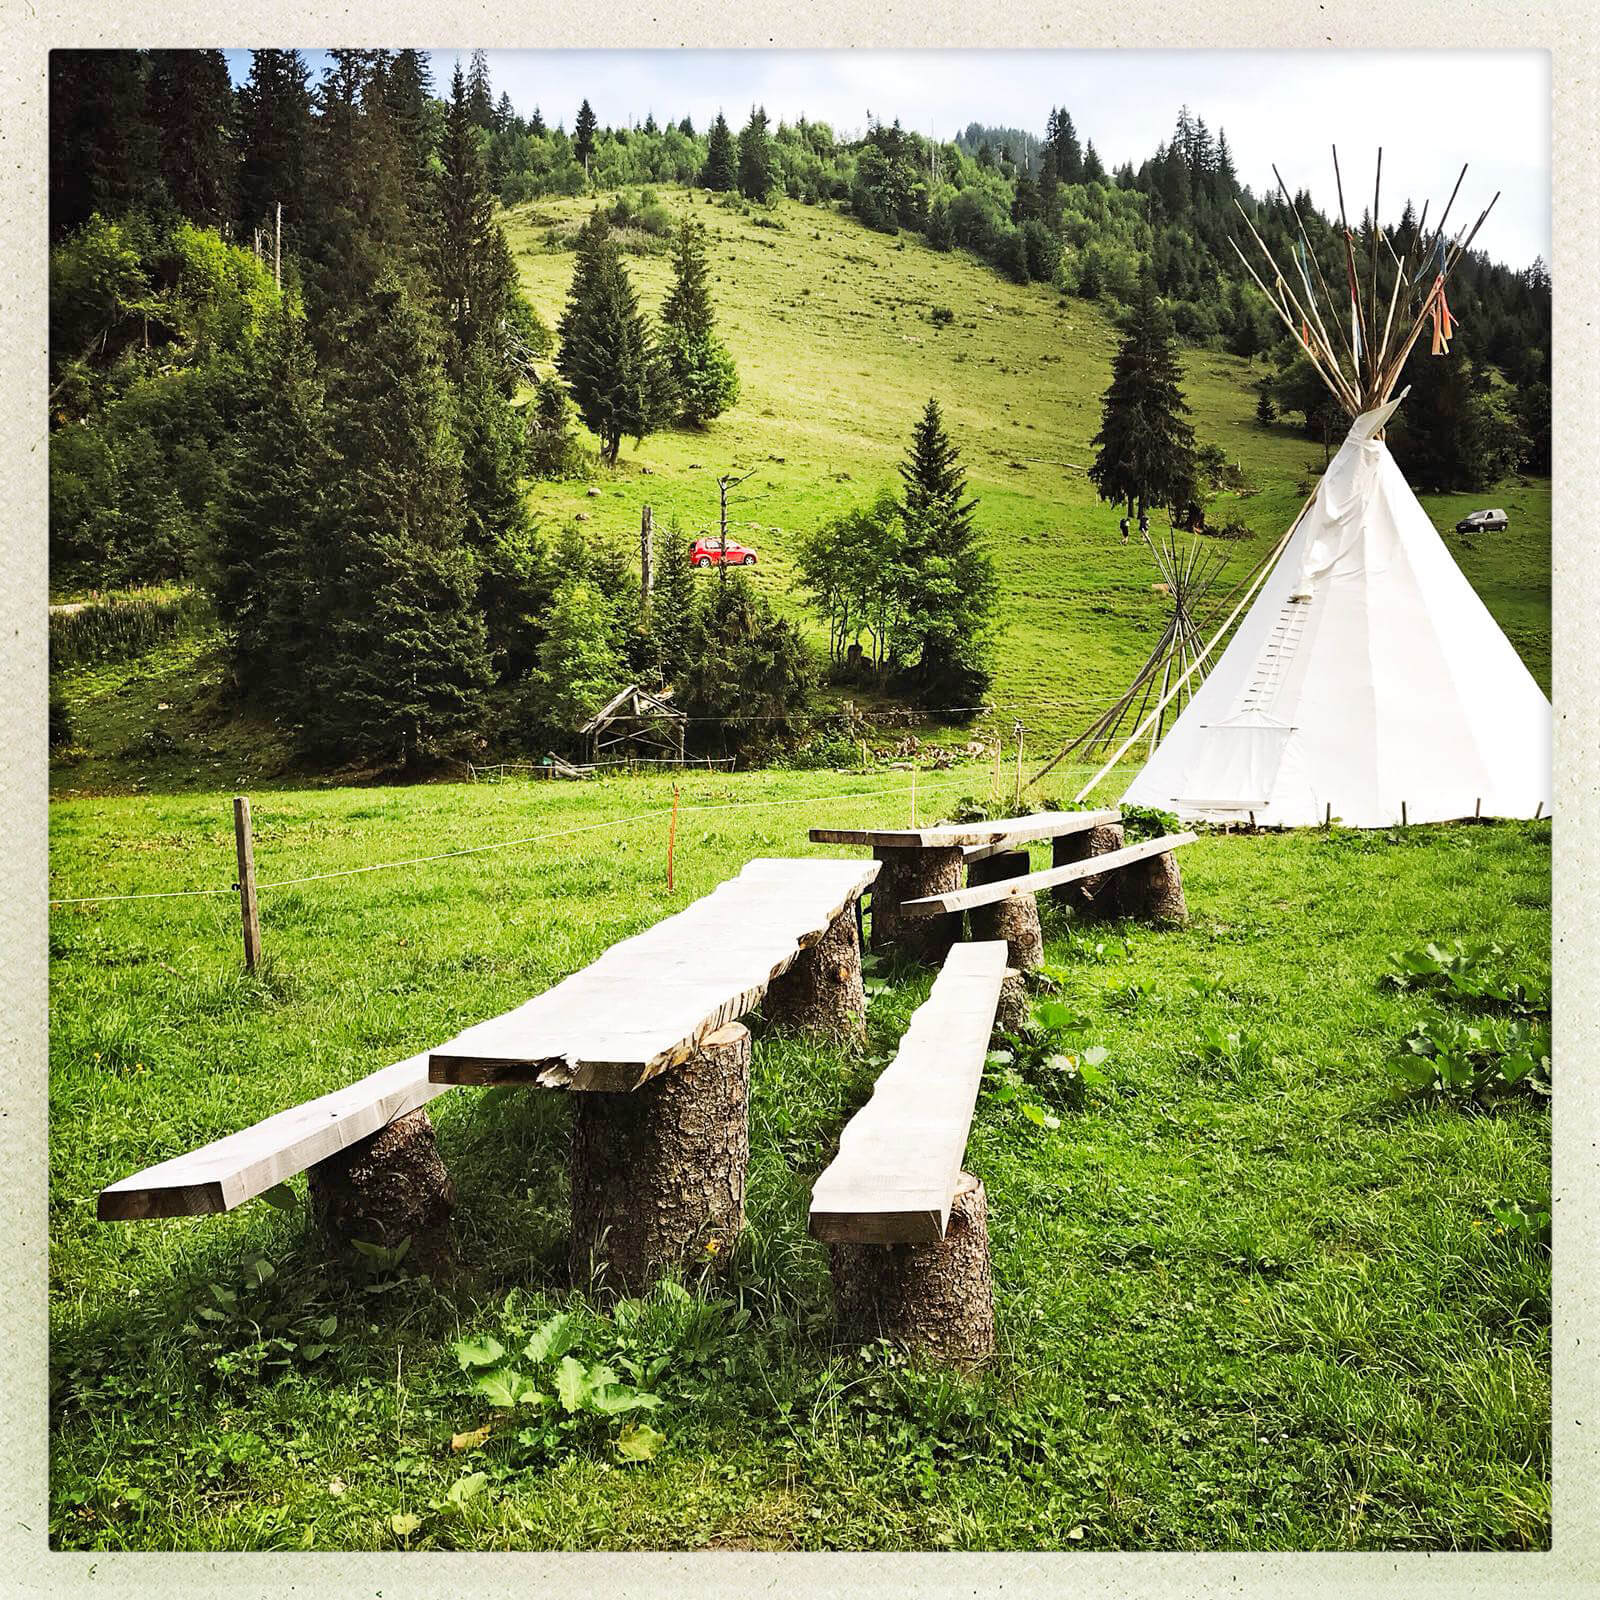 Tables and benches in the Tipi village